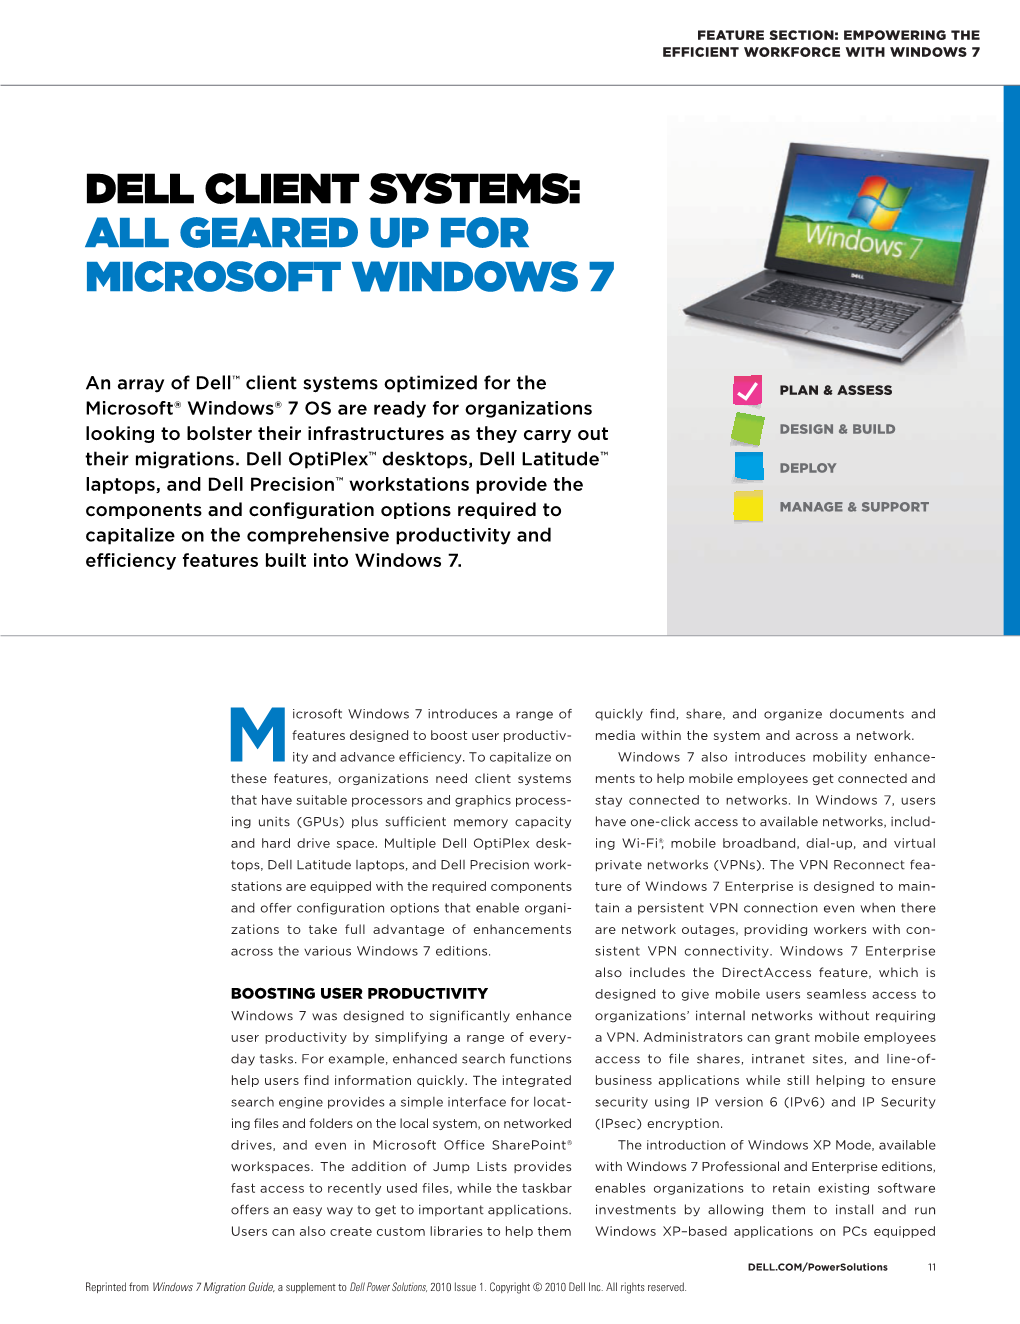 Dell Client Systems: All Geared up for Microsoft Windows 7